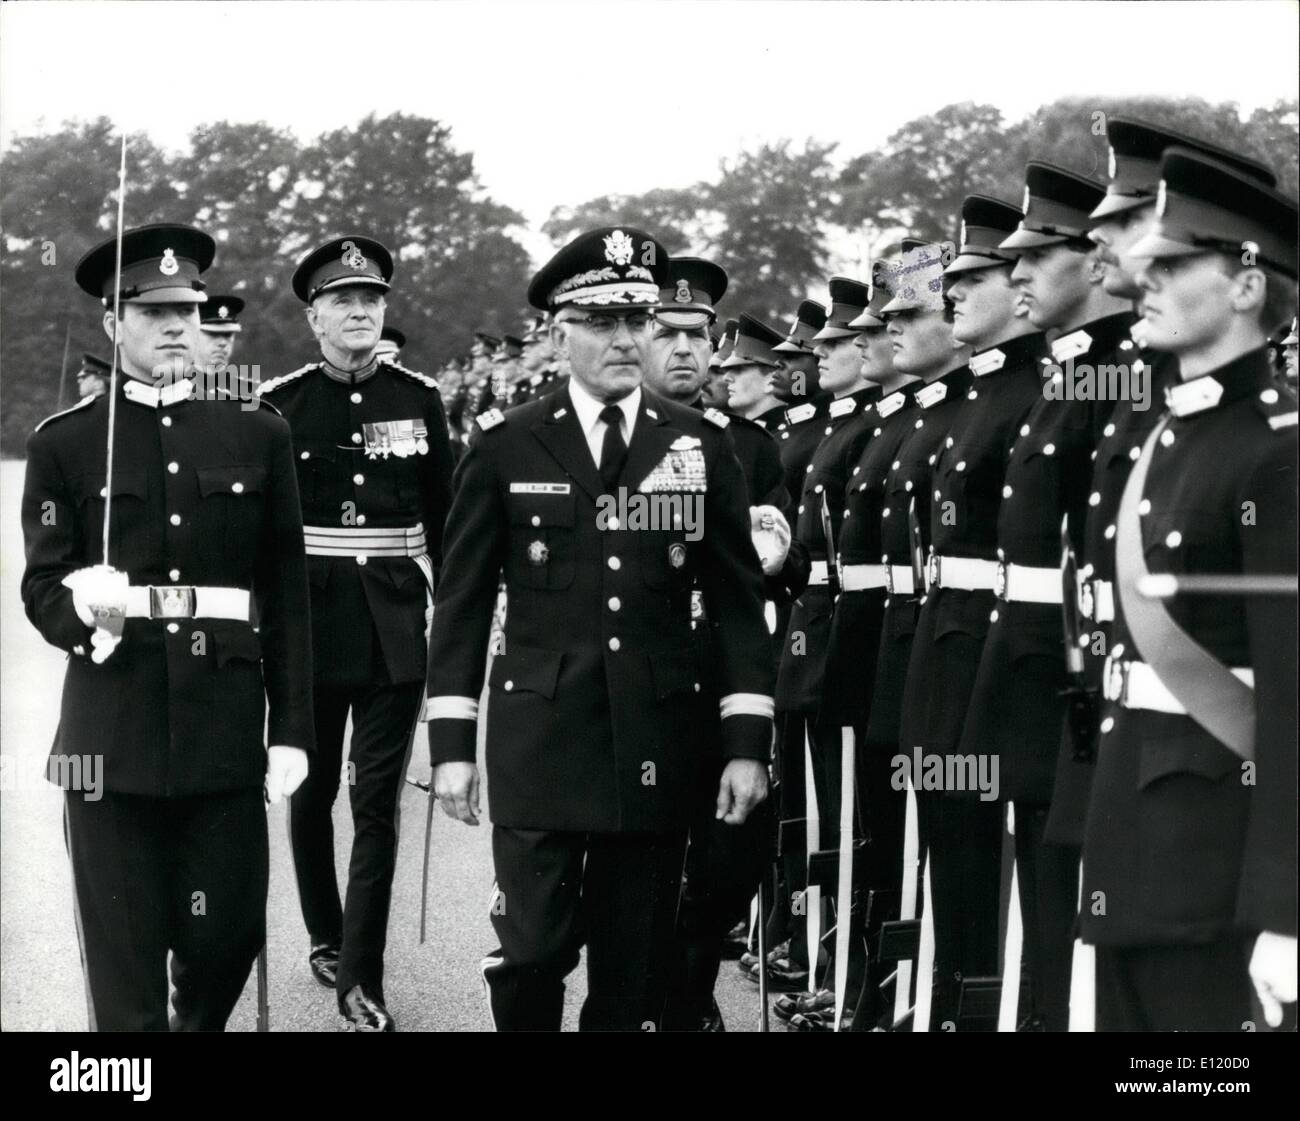 Aug. 08, 1981 - Top Sandhurst Cadet is a Gurkha: For the first time ever, a Gurkha soldier, Officer Cadet Bijay Kumar Rawat, 26, received the highly praized Sword of Honour at the Sandhurst passing out Sovereign Parade today. Reviewing the parade on behalf of the Queen, was General Bernard W. Rogers, Supreme Allied Commander Europe. Photo shows American General Bernard W Rogers, Supreme Allied Commander Europe, seen reviewing the parade on behalf of The Queen at Sandhurst today. Stock Photo